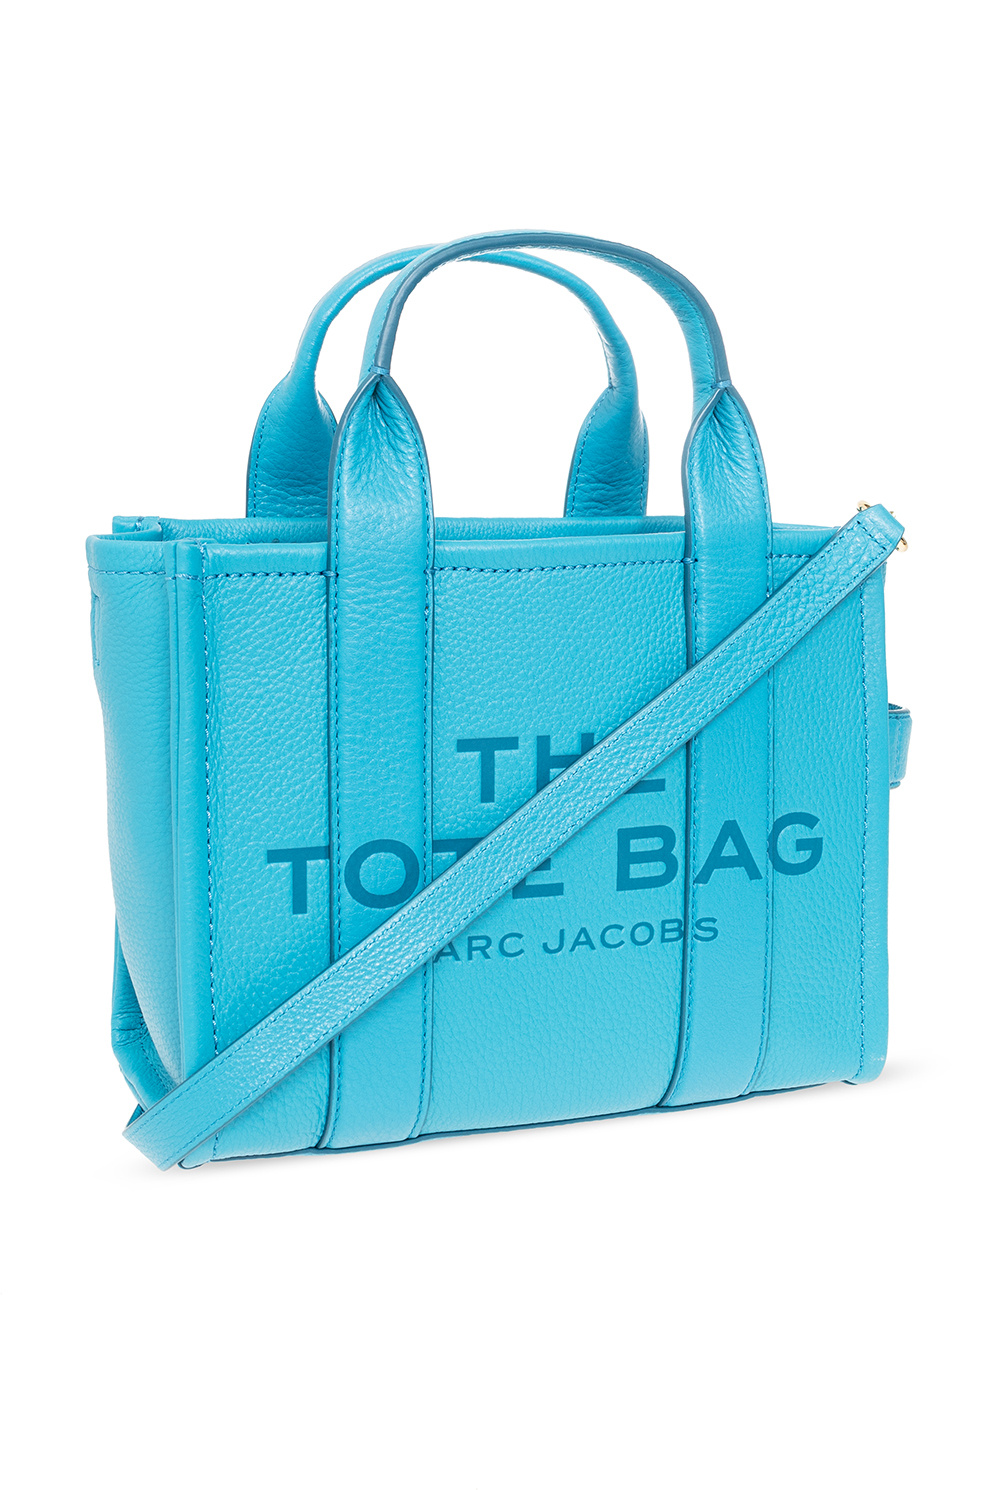  Marc Jacobs Women's The Mini Tote, Spring Blue, One